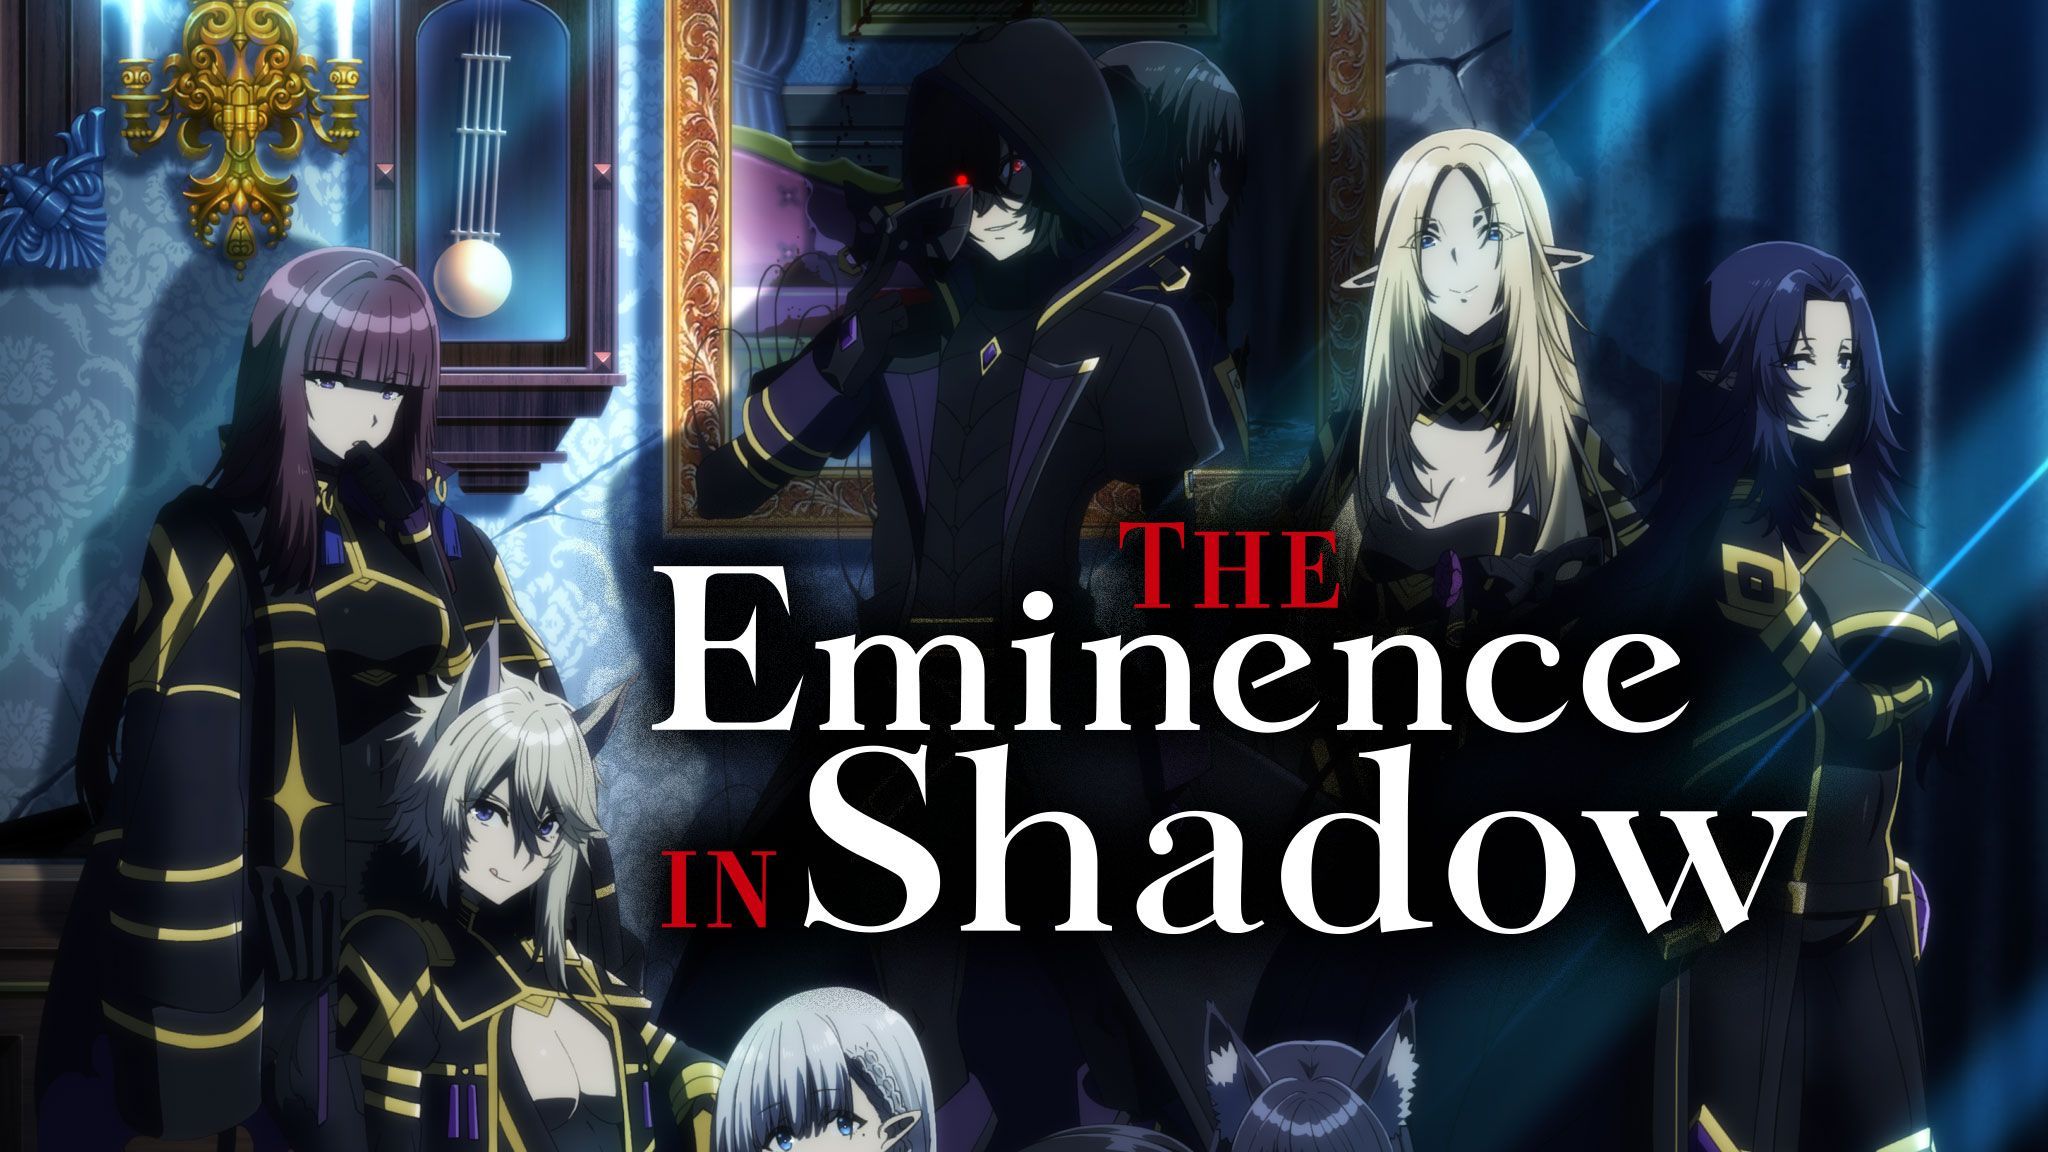 ep18[eng dub] eminence in shadow 2023 awsome anime - video Dailymotion